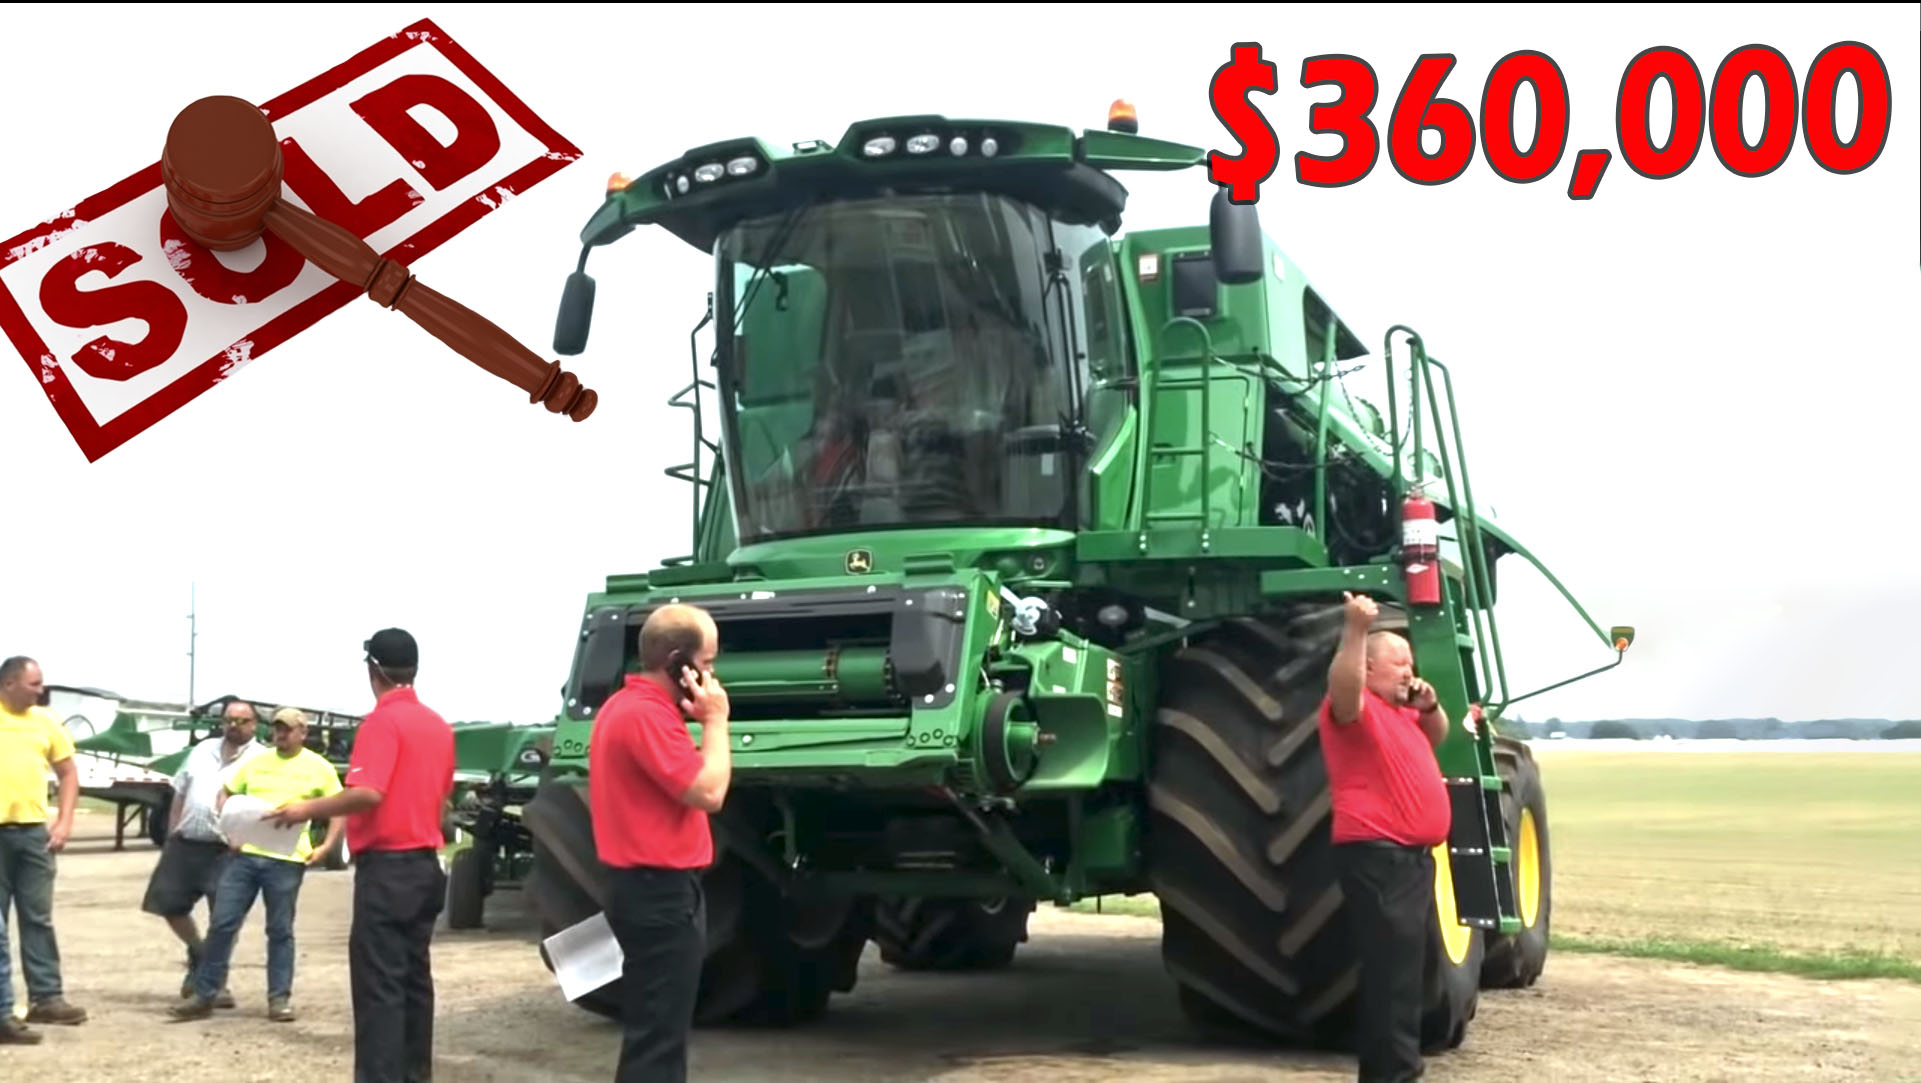 RECORD PRICE: 2017 John Deere S680 Combine with 4 Sep. Hours Sold $360K on Wayland, MI Auction